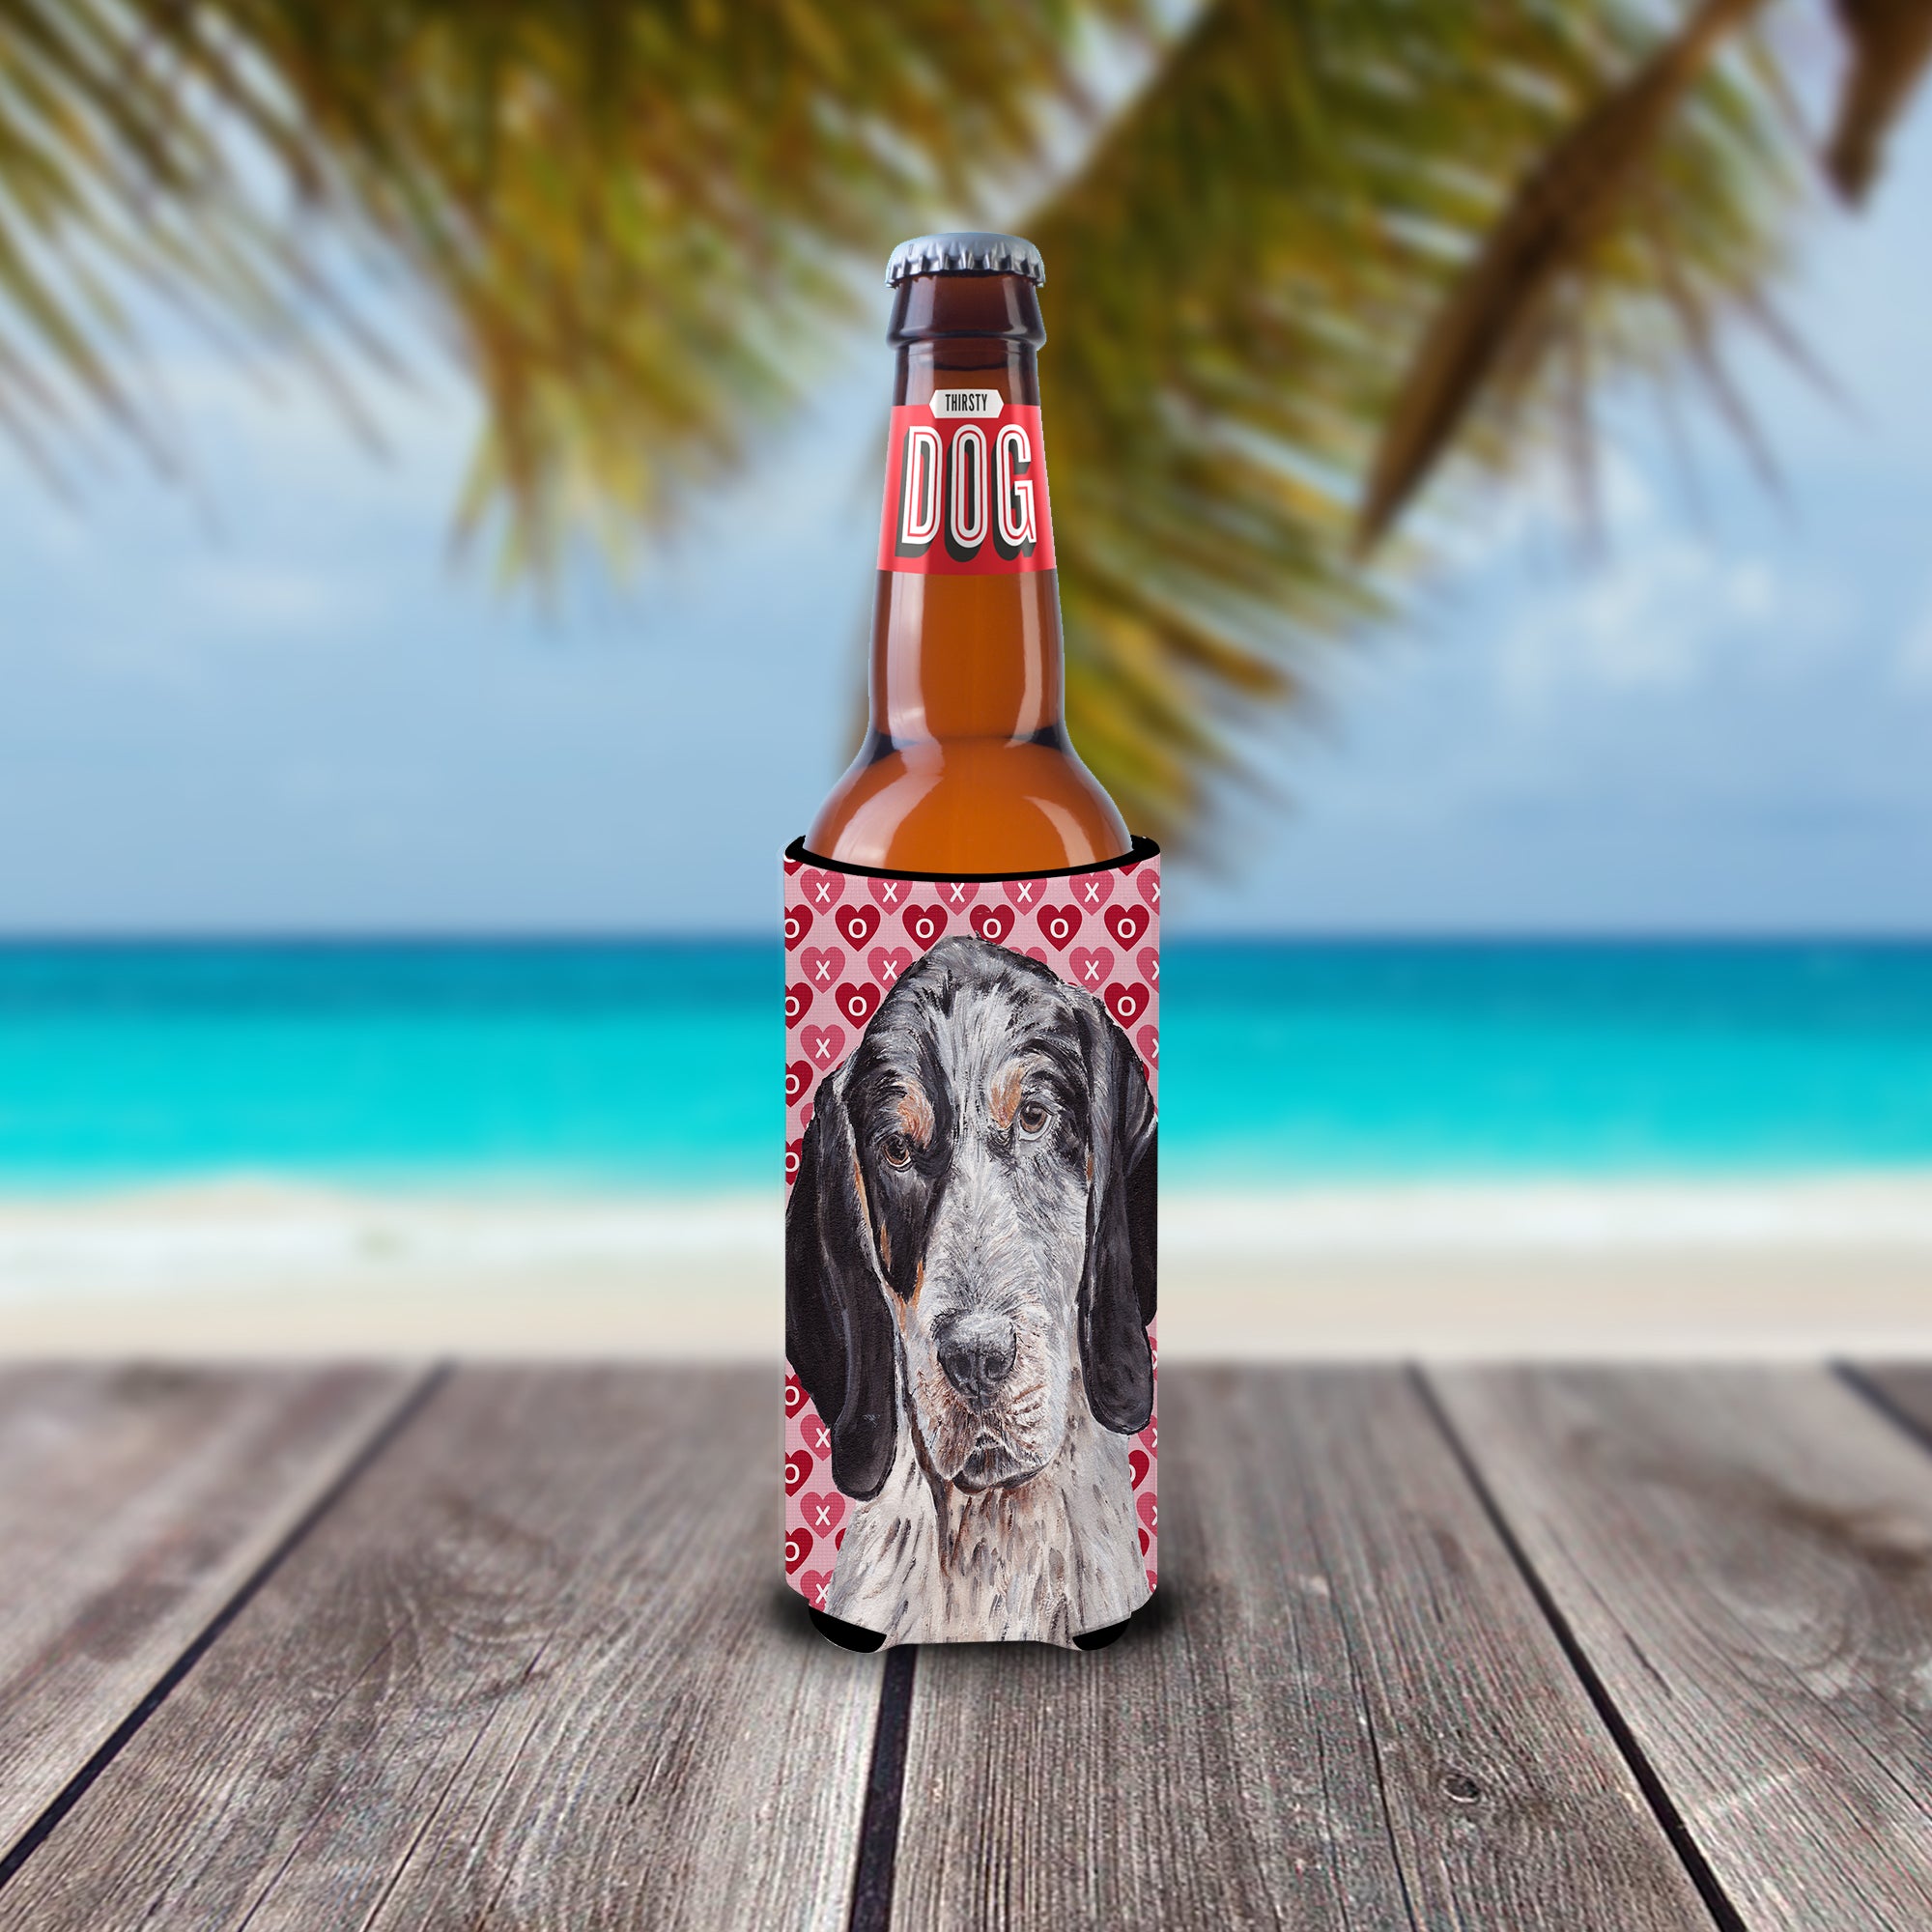 Blue Tick Coonhound Hearts and Love Ultra Beverage Insulators for slim cans SC9697MUK.